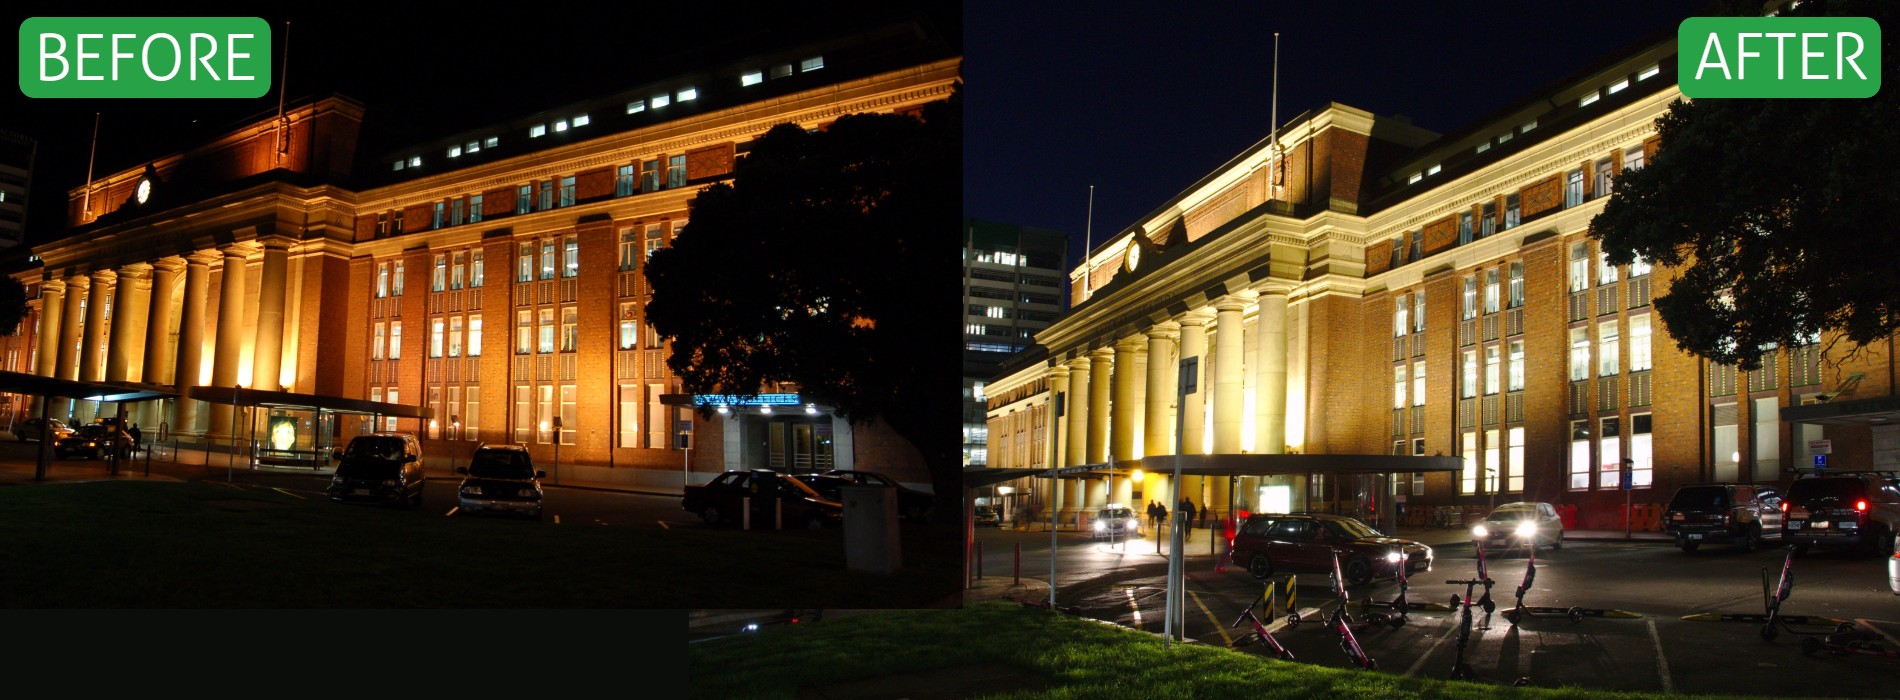 Wellington Station Before After 1 1